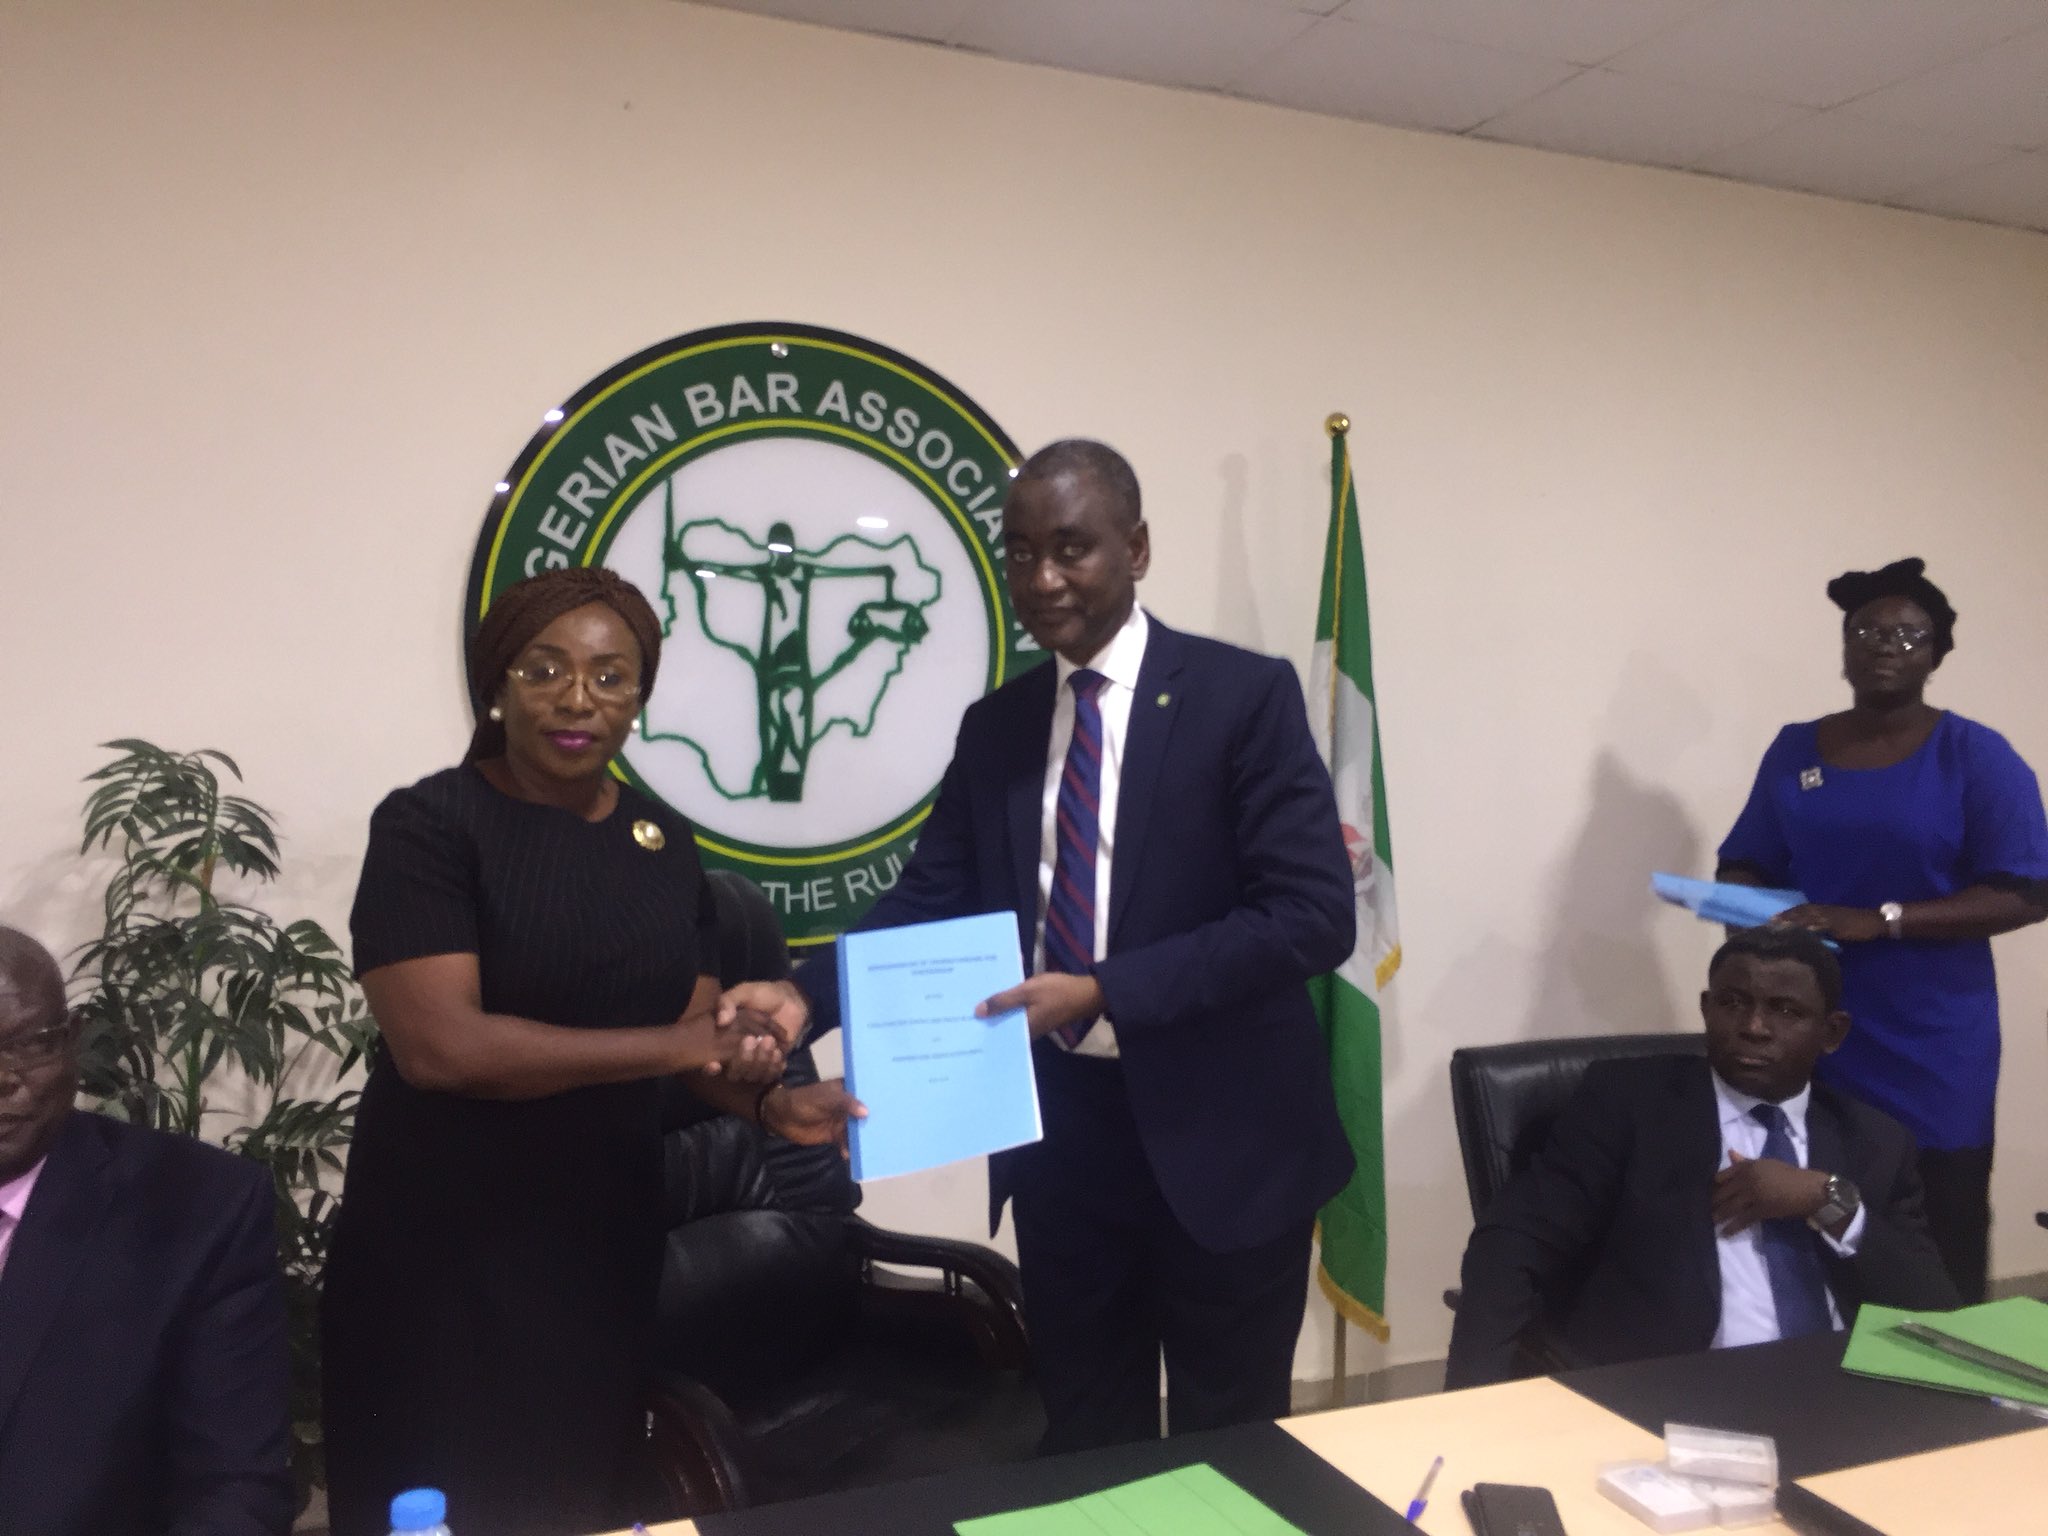 NBA signs MoU with Coalition for Justice and Peace in Africa